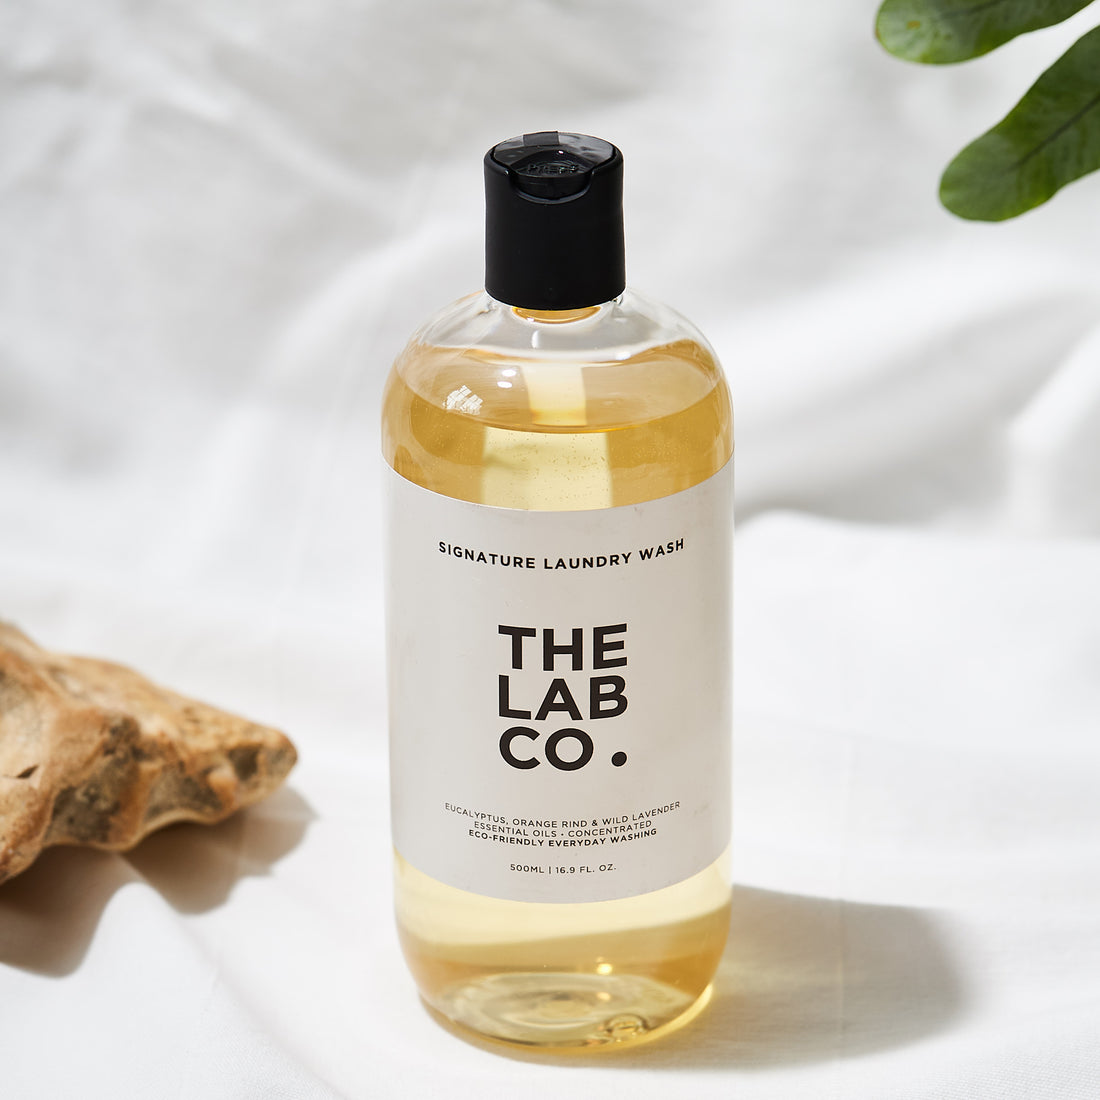 Introducing The Lab Co.